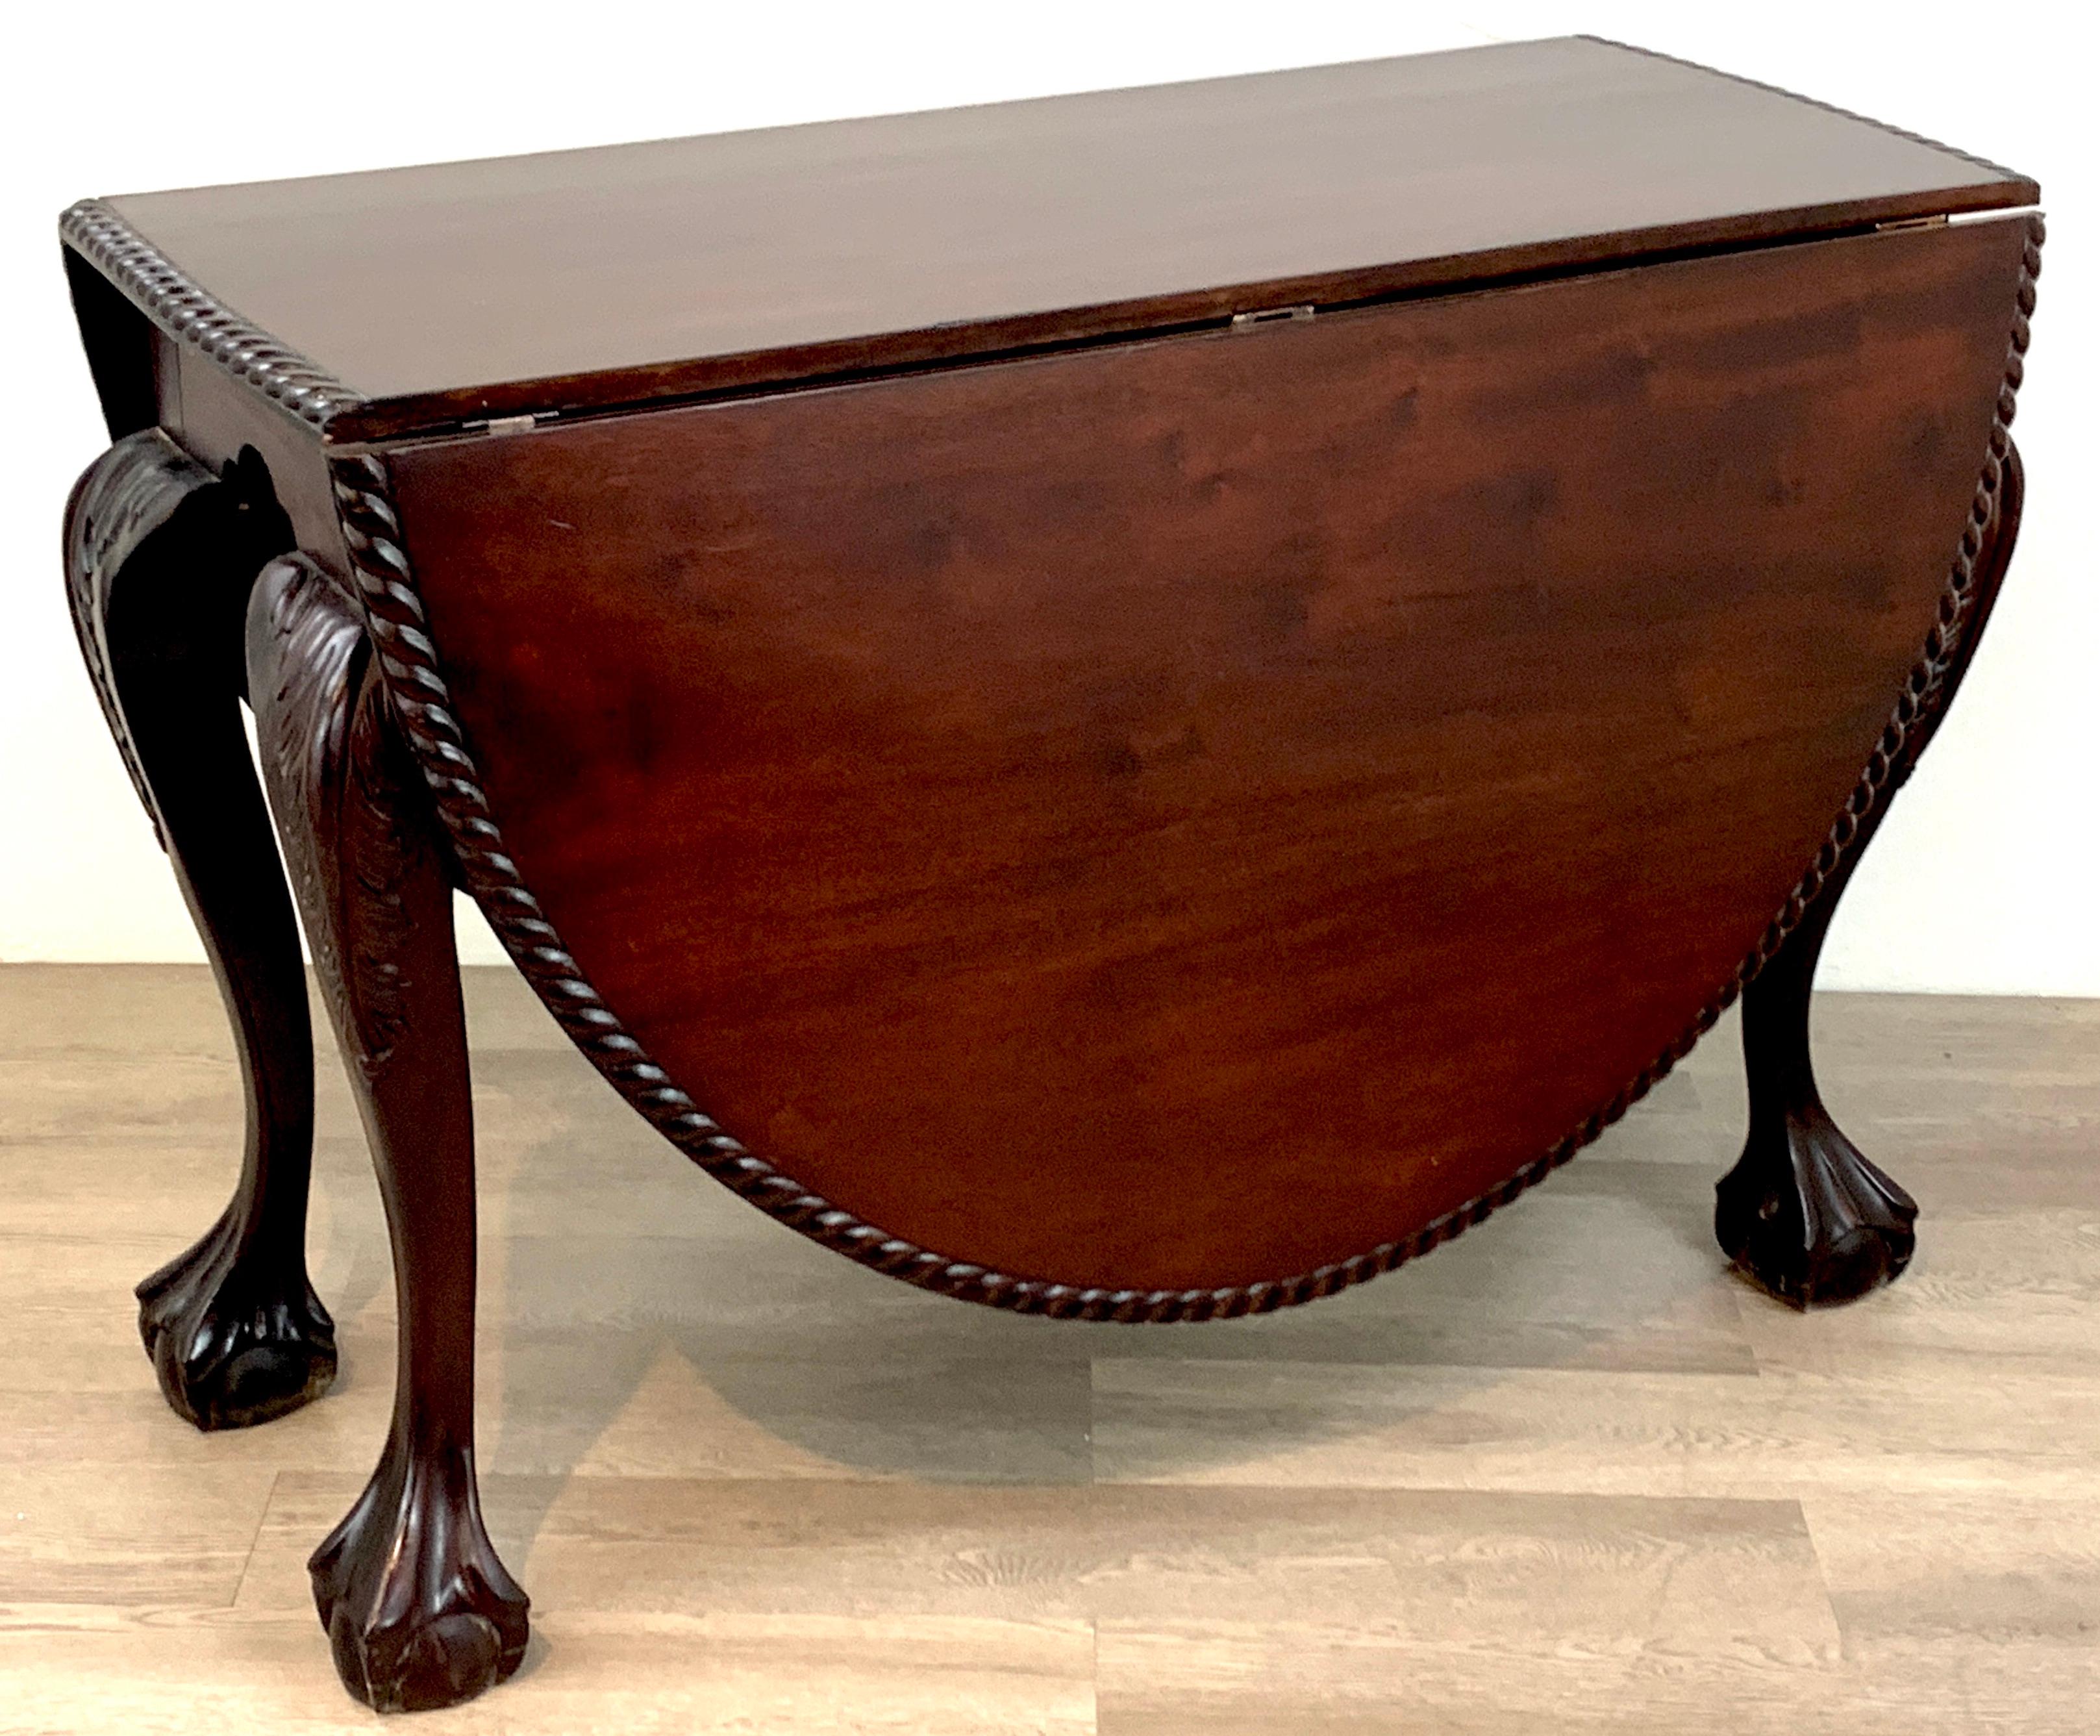 19th century English mahogany ball & claw foot tuck away dining room table, a versatile antique table, beautiful figured mahogany roped edge oval table, raised on four cabriole legs with well carved ball and claw feet. When completely open the table